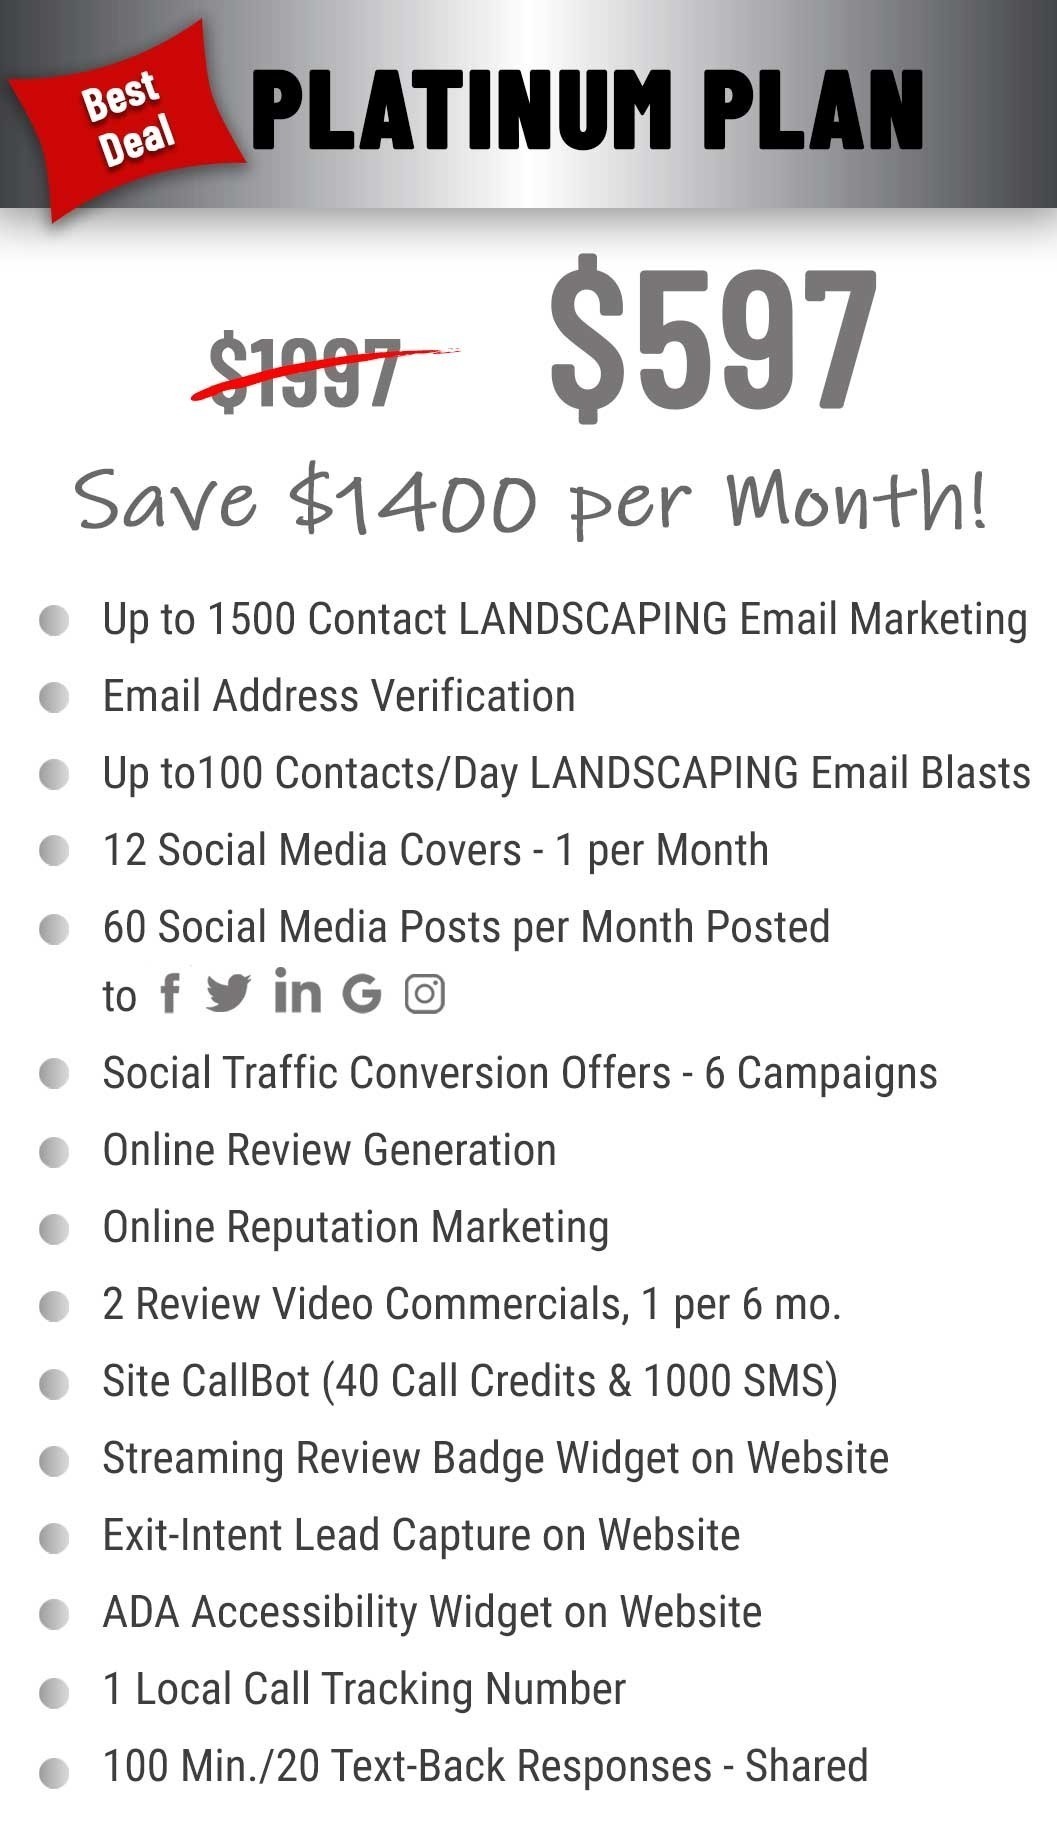 platinum plan $597 per month pricing and features for landscaping contractors.